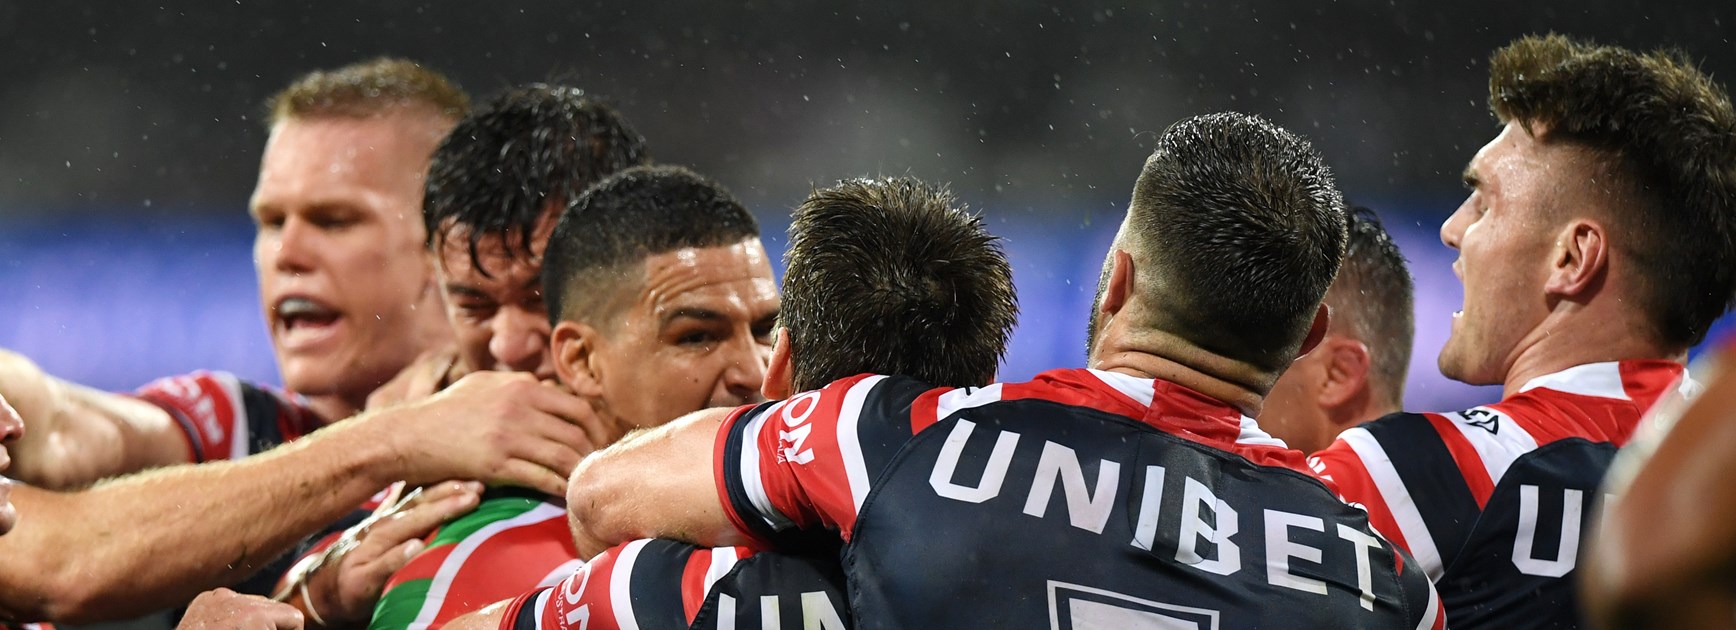 Bennett hits back at 'immature' Roosters over Walker stoush